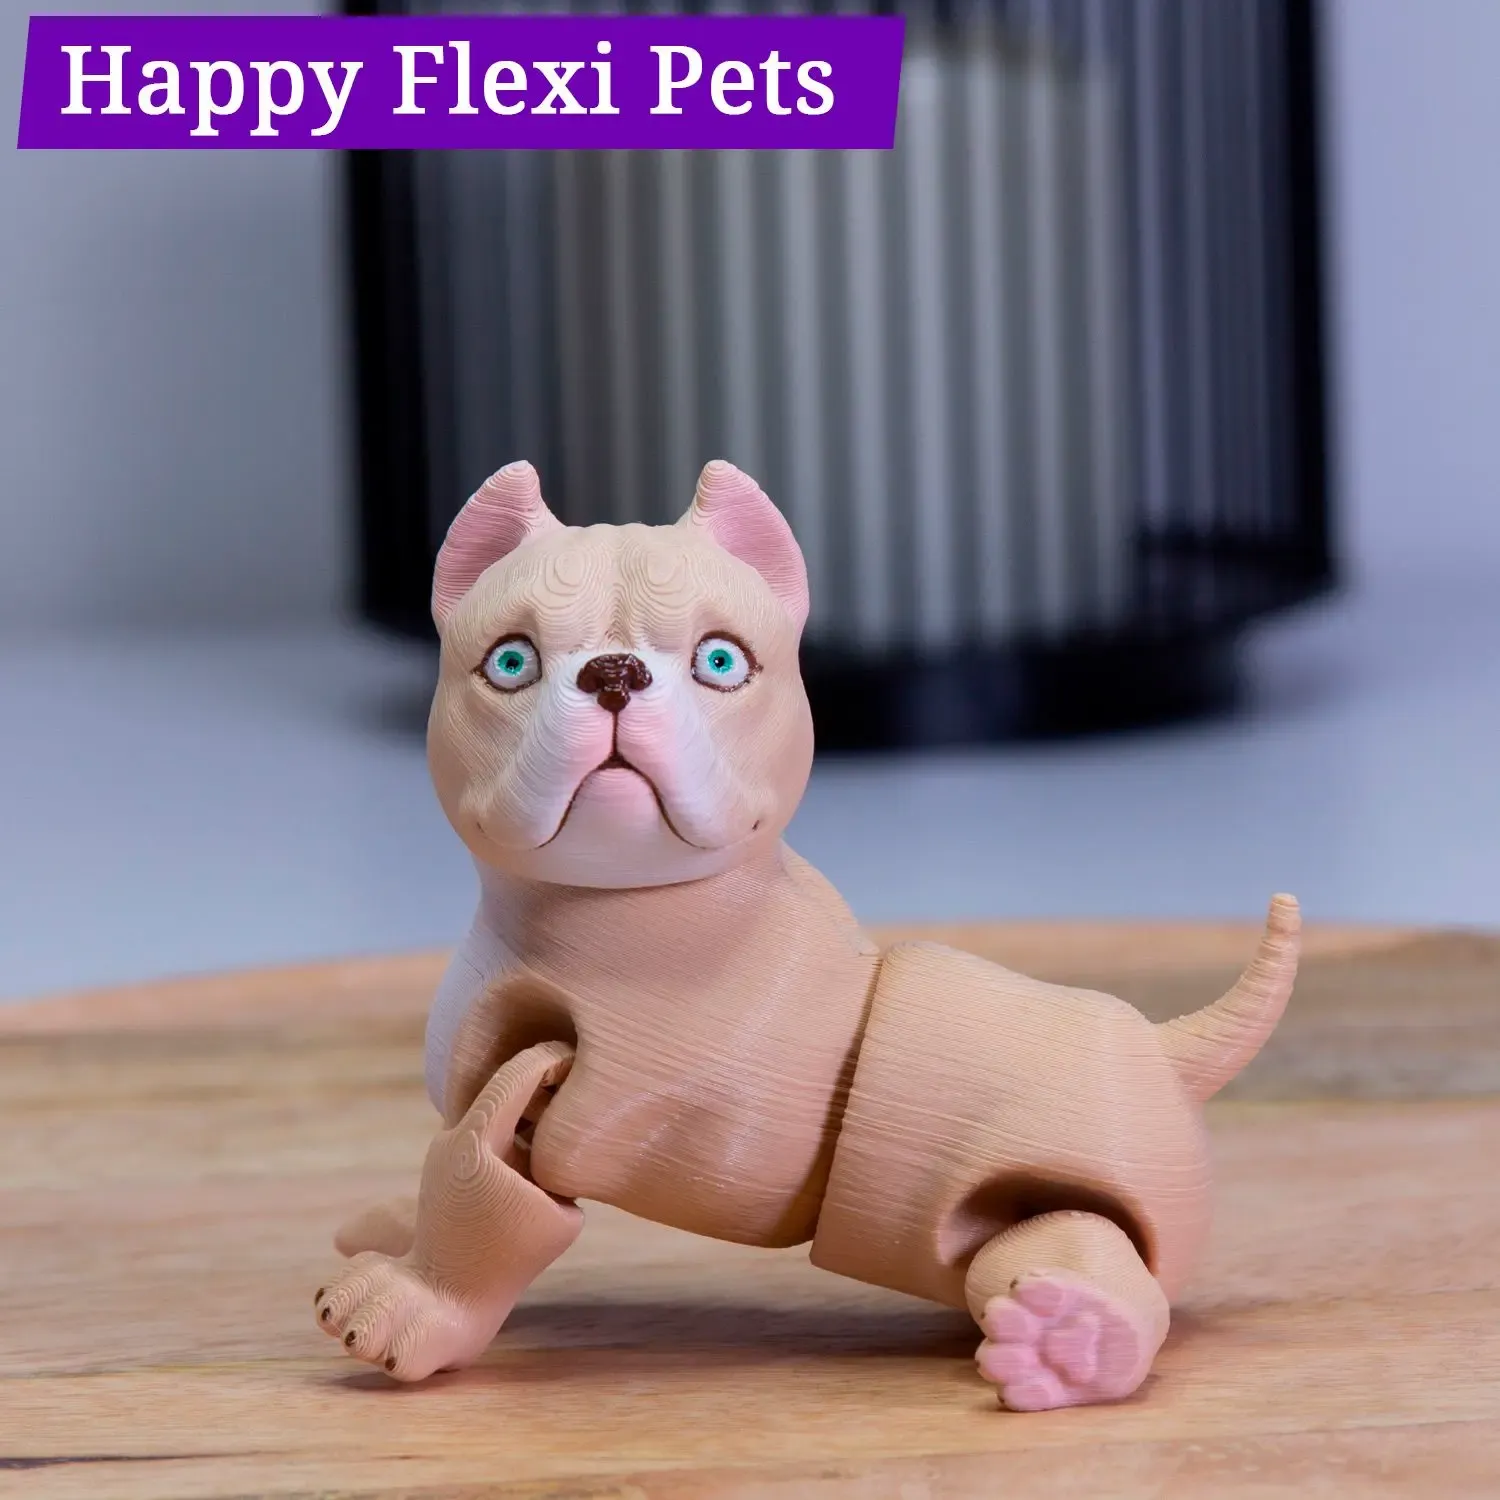 American Bully dog articulated toy by Happy Flexi Pets